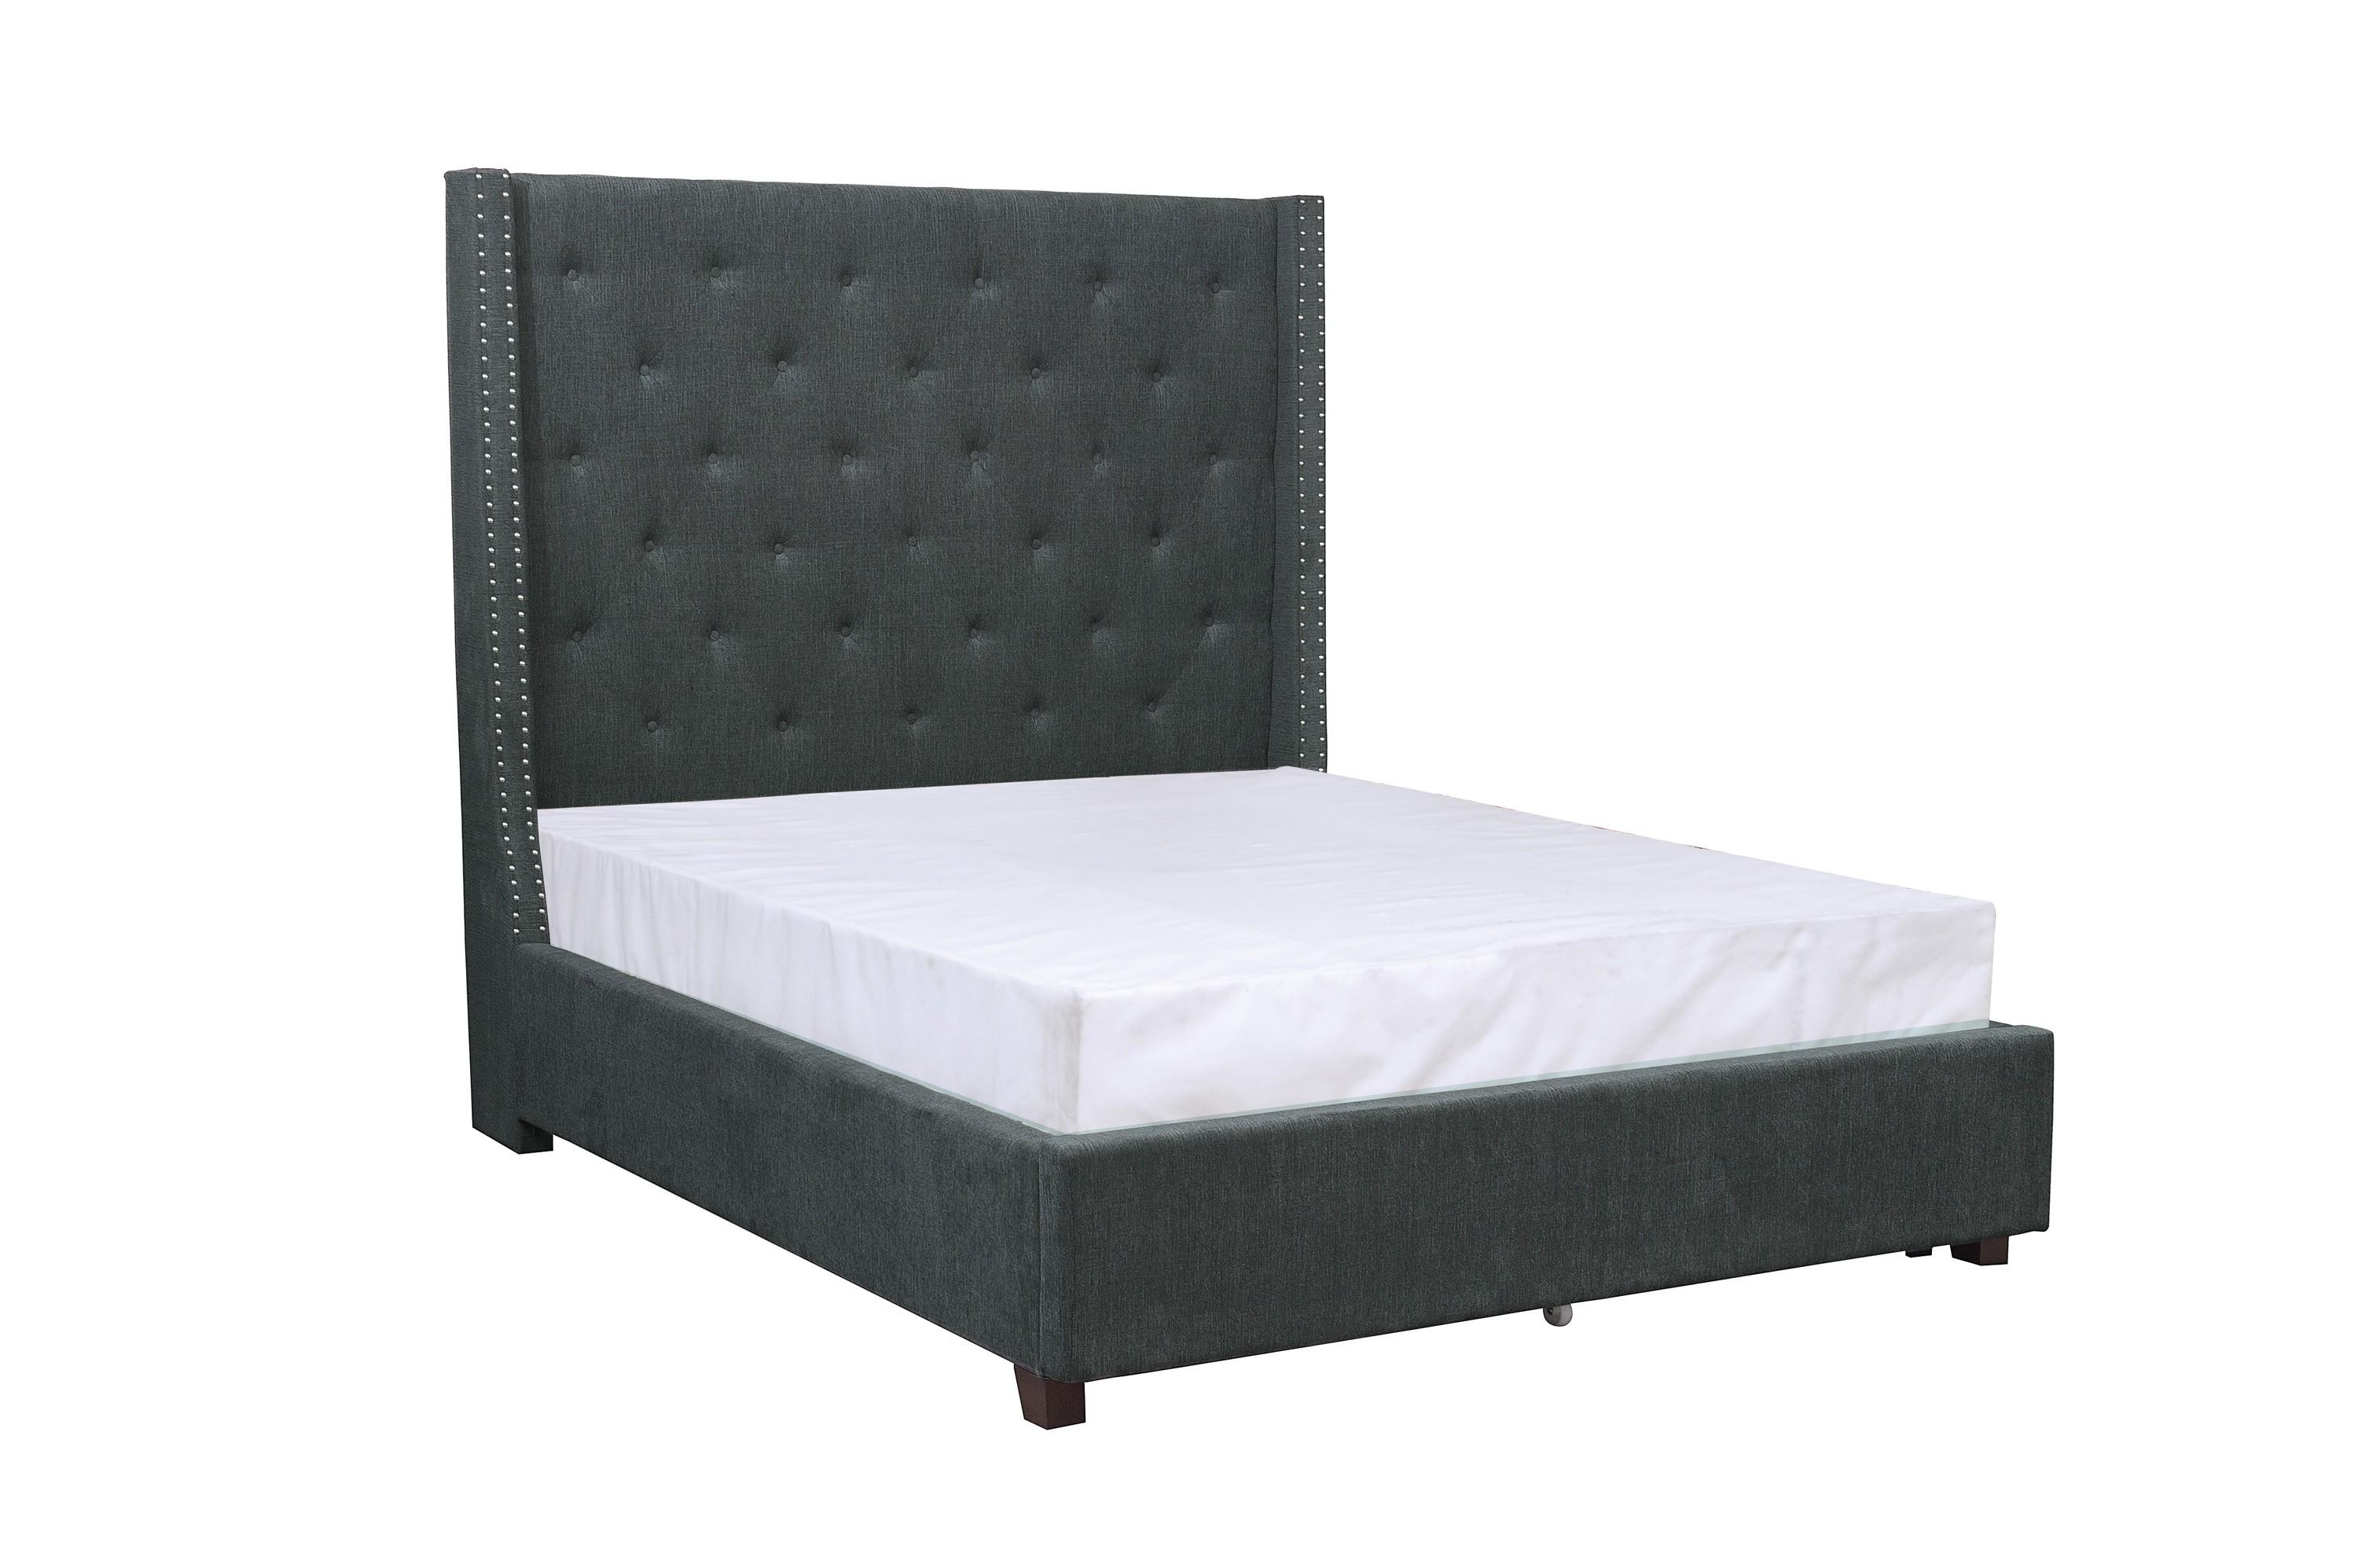 Modern Bed 5877GY-1* Fairborn 5877GY-1* in Dark Gray Polyester